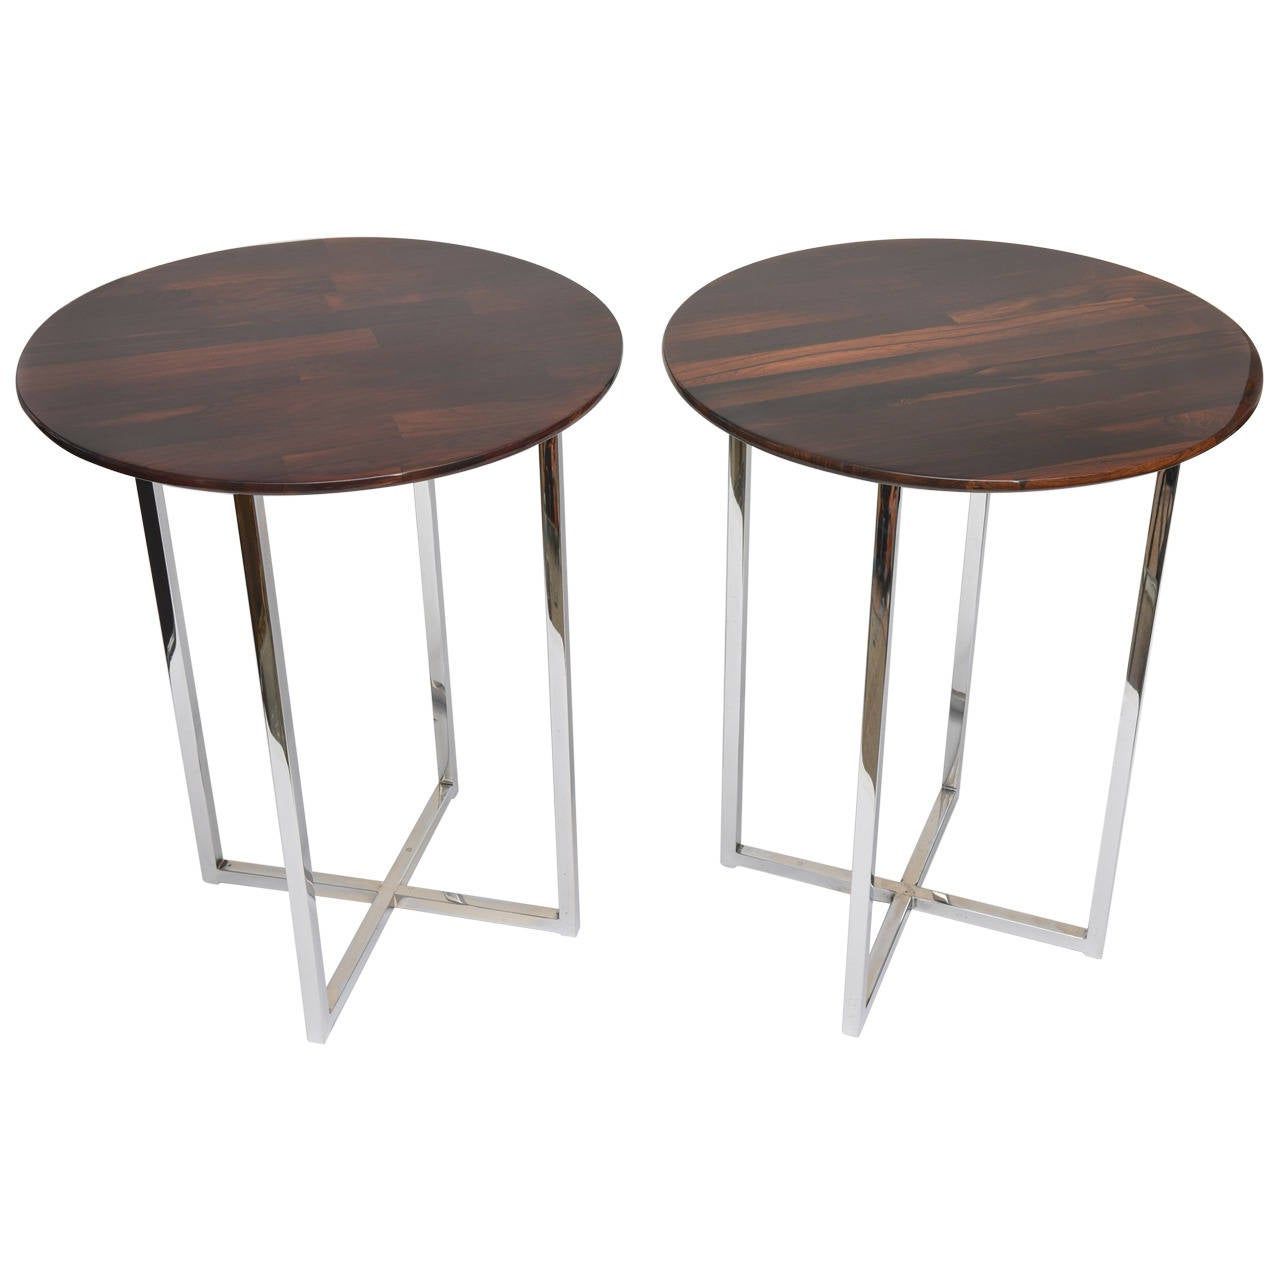 Newest Polished Chrome Round Console Tables Inside Pair Of Milo Baughman Polished Chrome And Wood Side Tables (View 4 of 10)